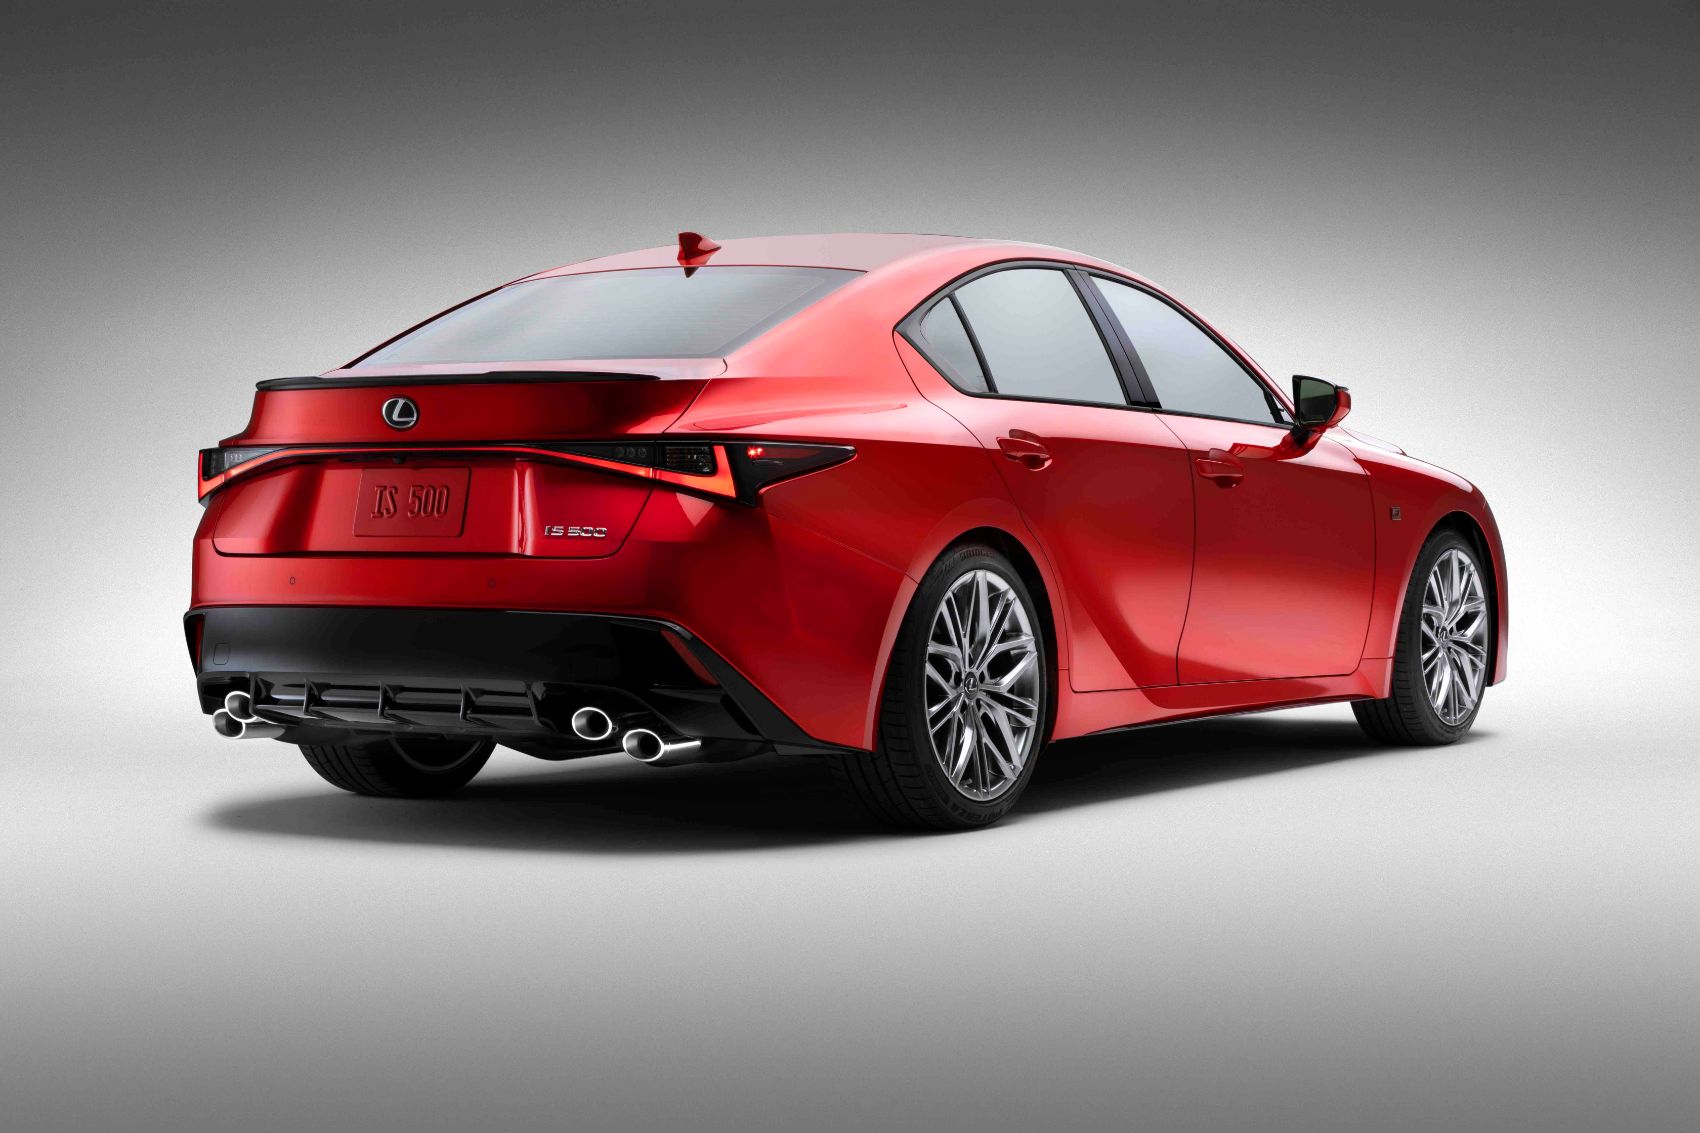 Lexus IS 500 F SPORT Performance: There's a Powerful V8 Under That ...